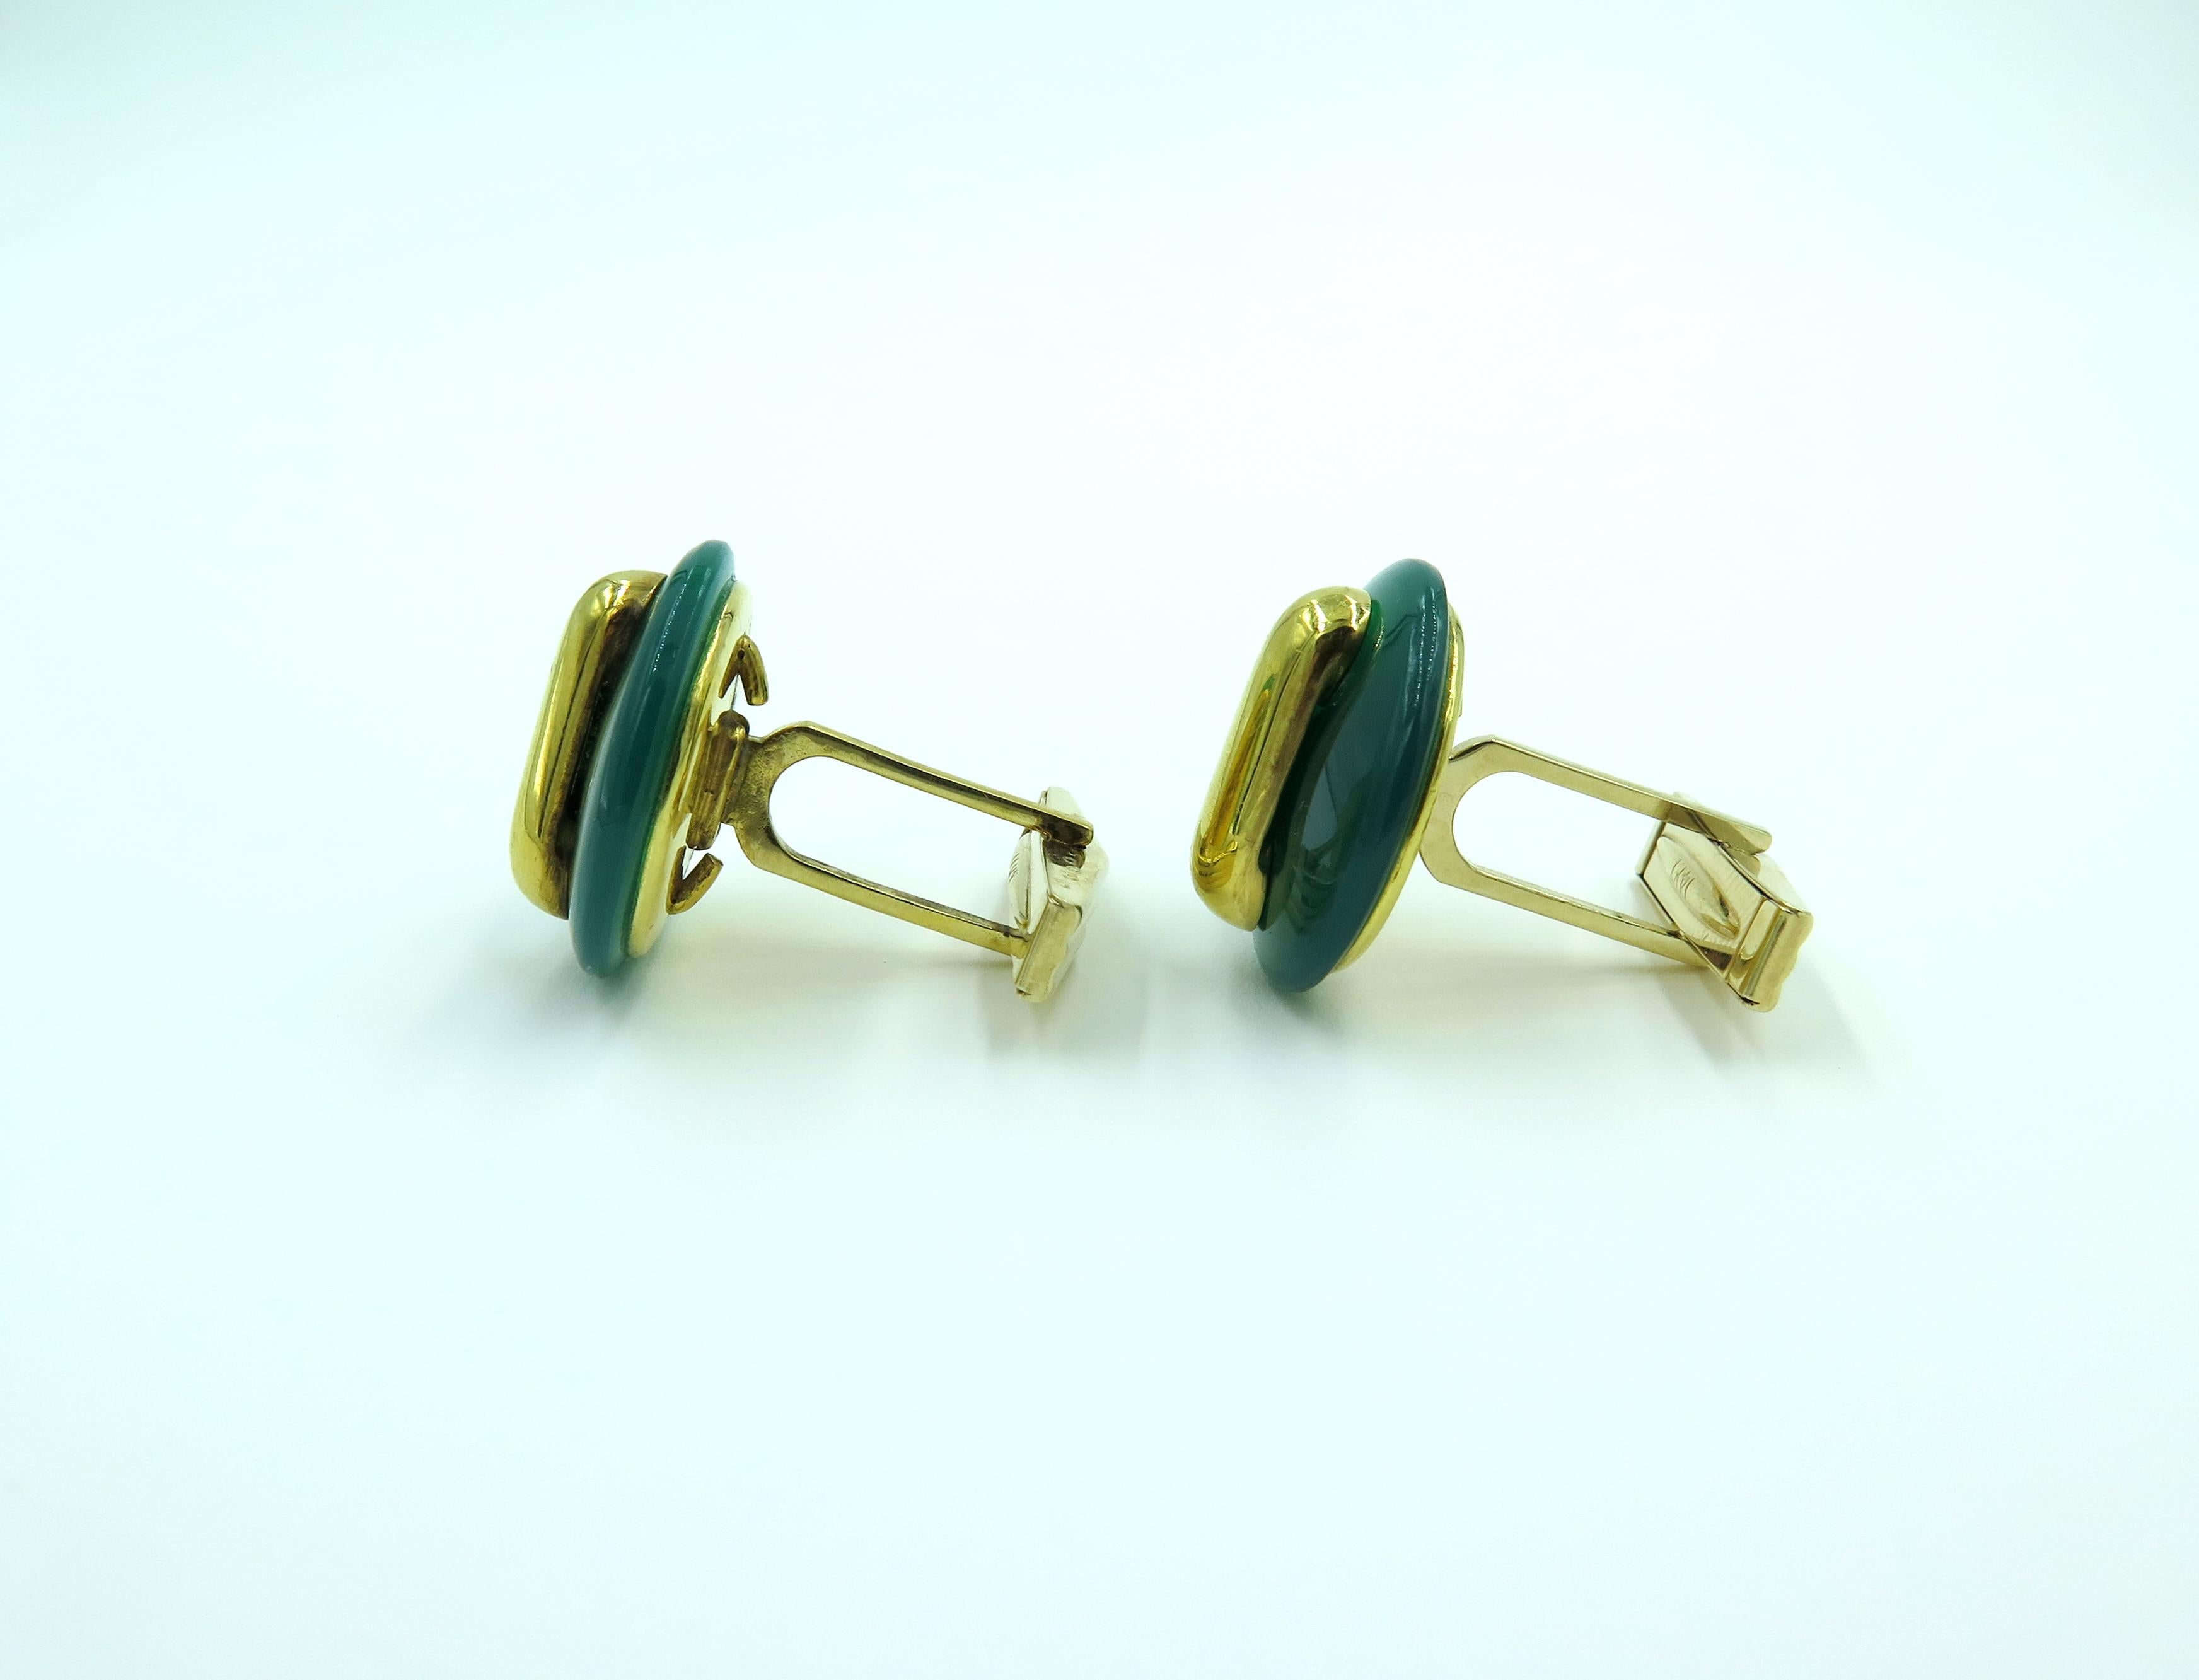 A pair of 18 karat yellow gold and green onyx cufflinks. Cartier. Circa 1970. Each single link set with a freen onyx dix, enhanced by a gold bar, with 14 karat yellow gold swivel back. Diameter is approximately 3/4 inch, gross weight is